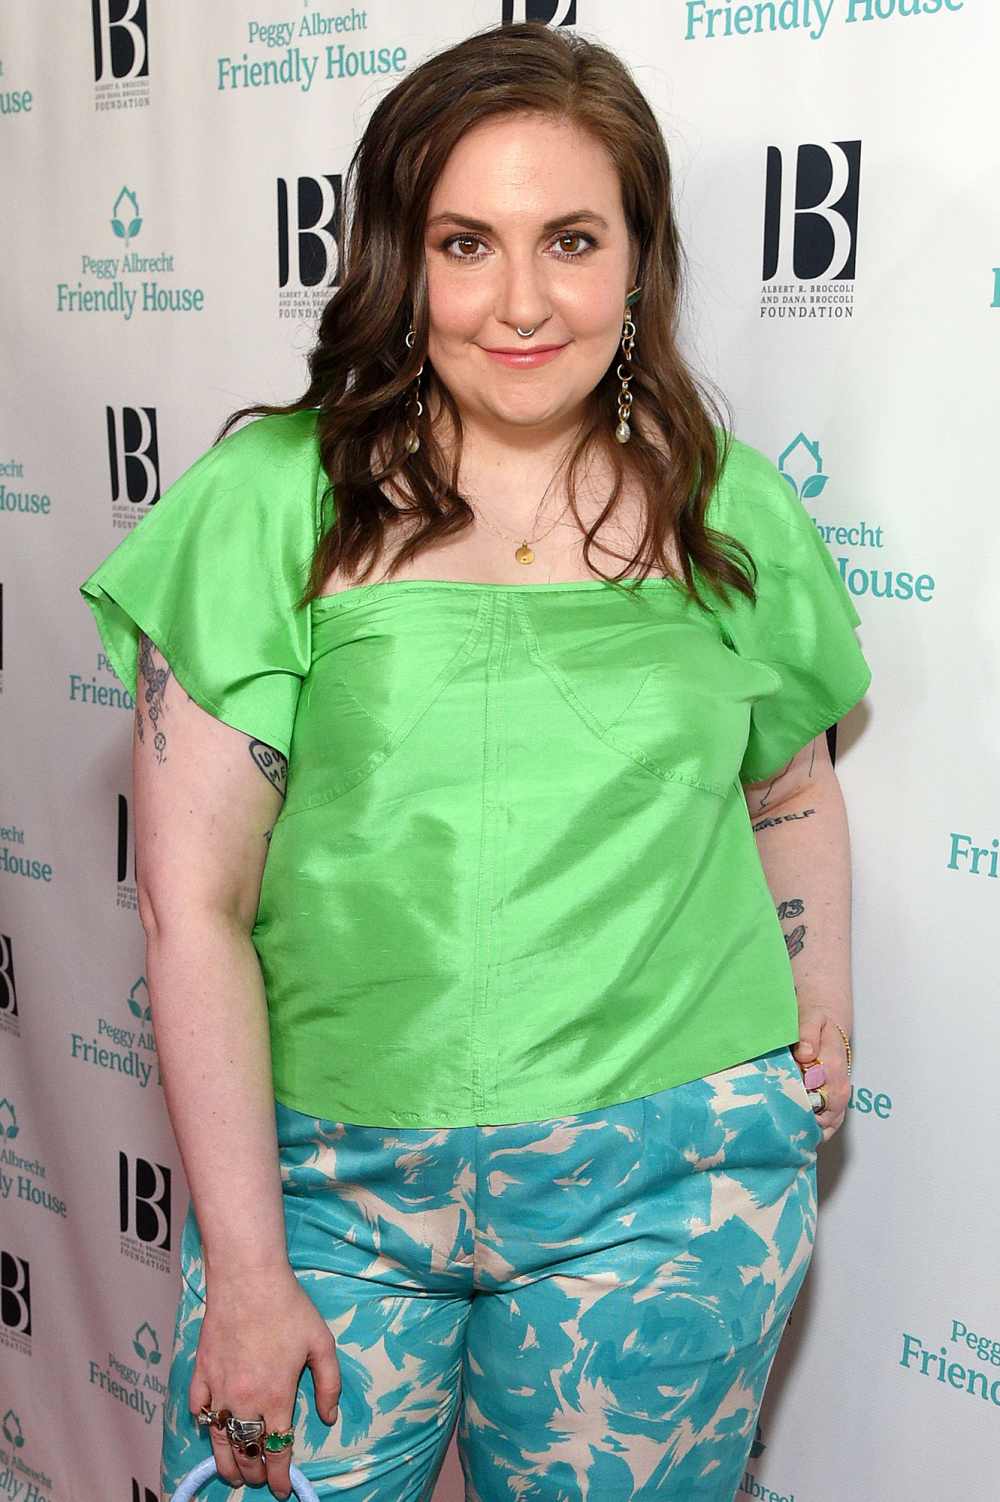 Lena Dunham Says She’s ‘Stronger Than Ever’ After Health Battle